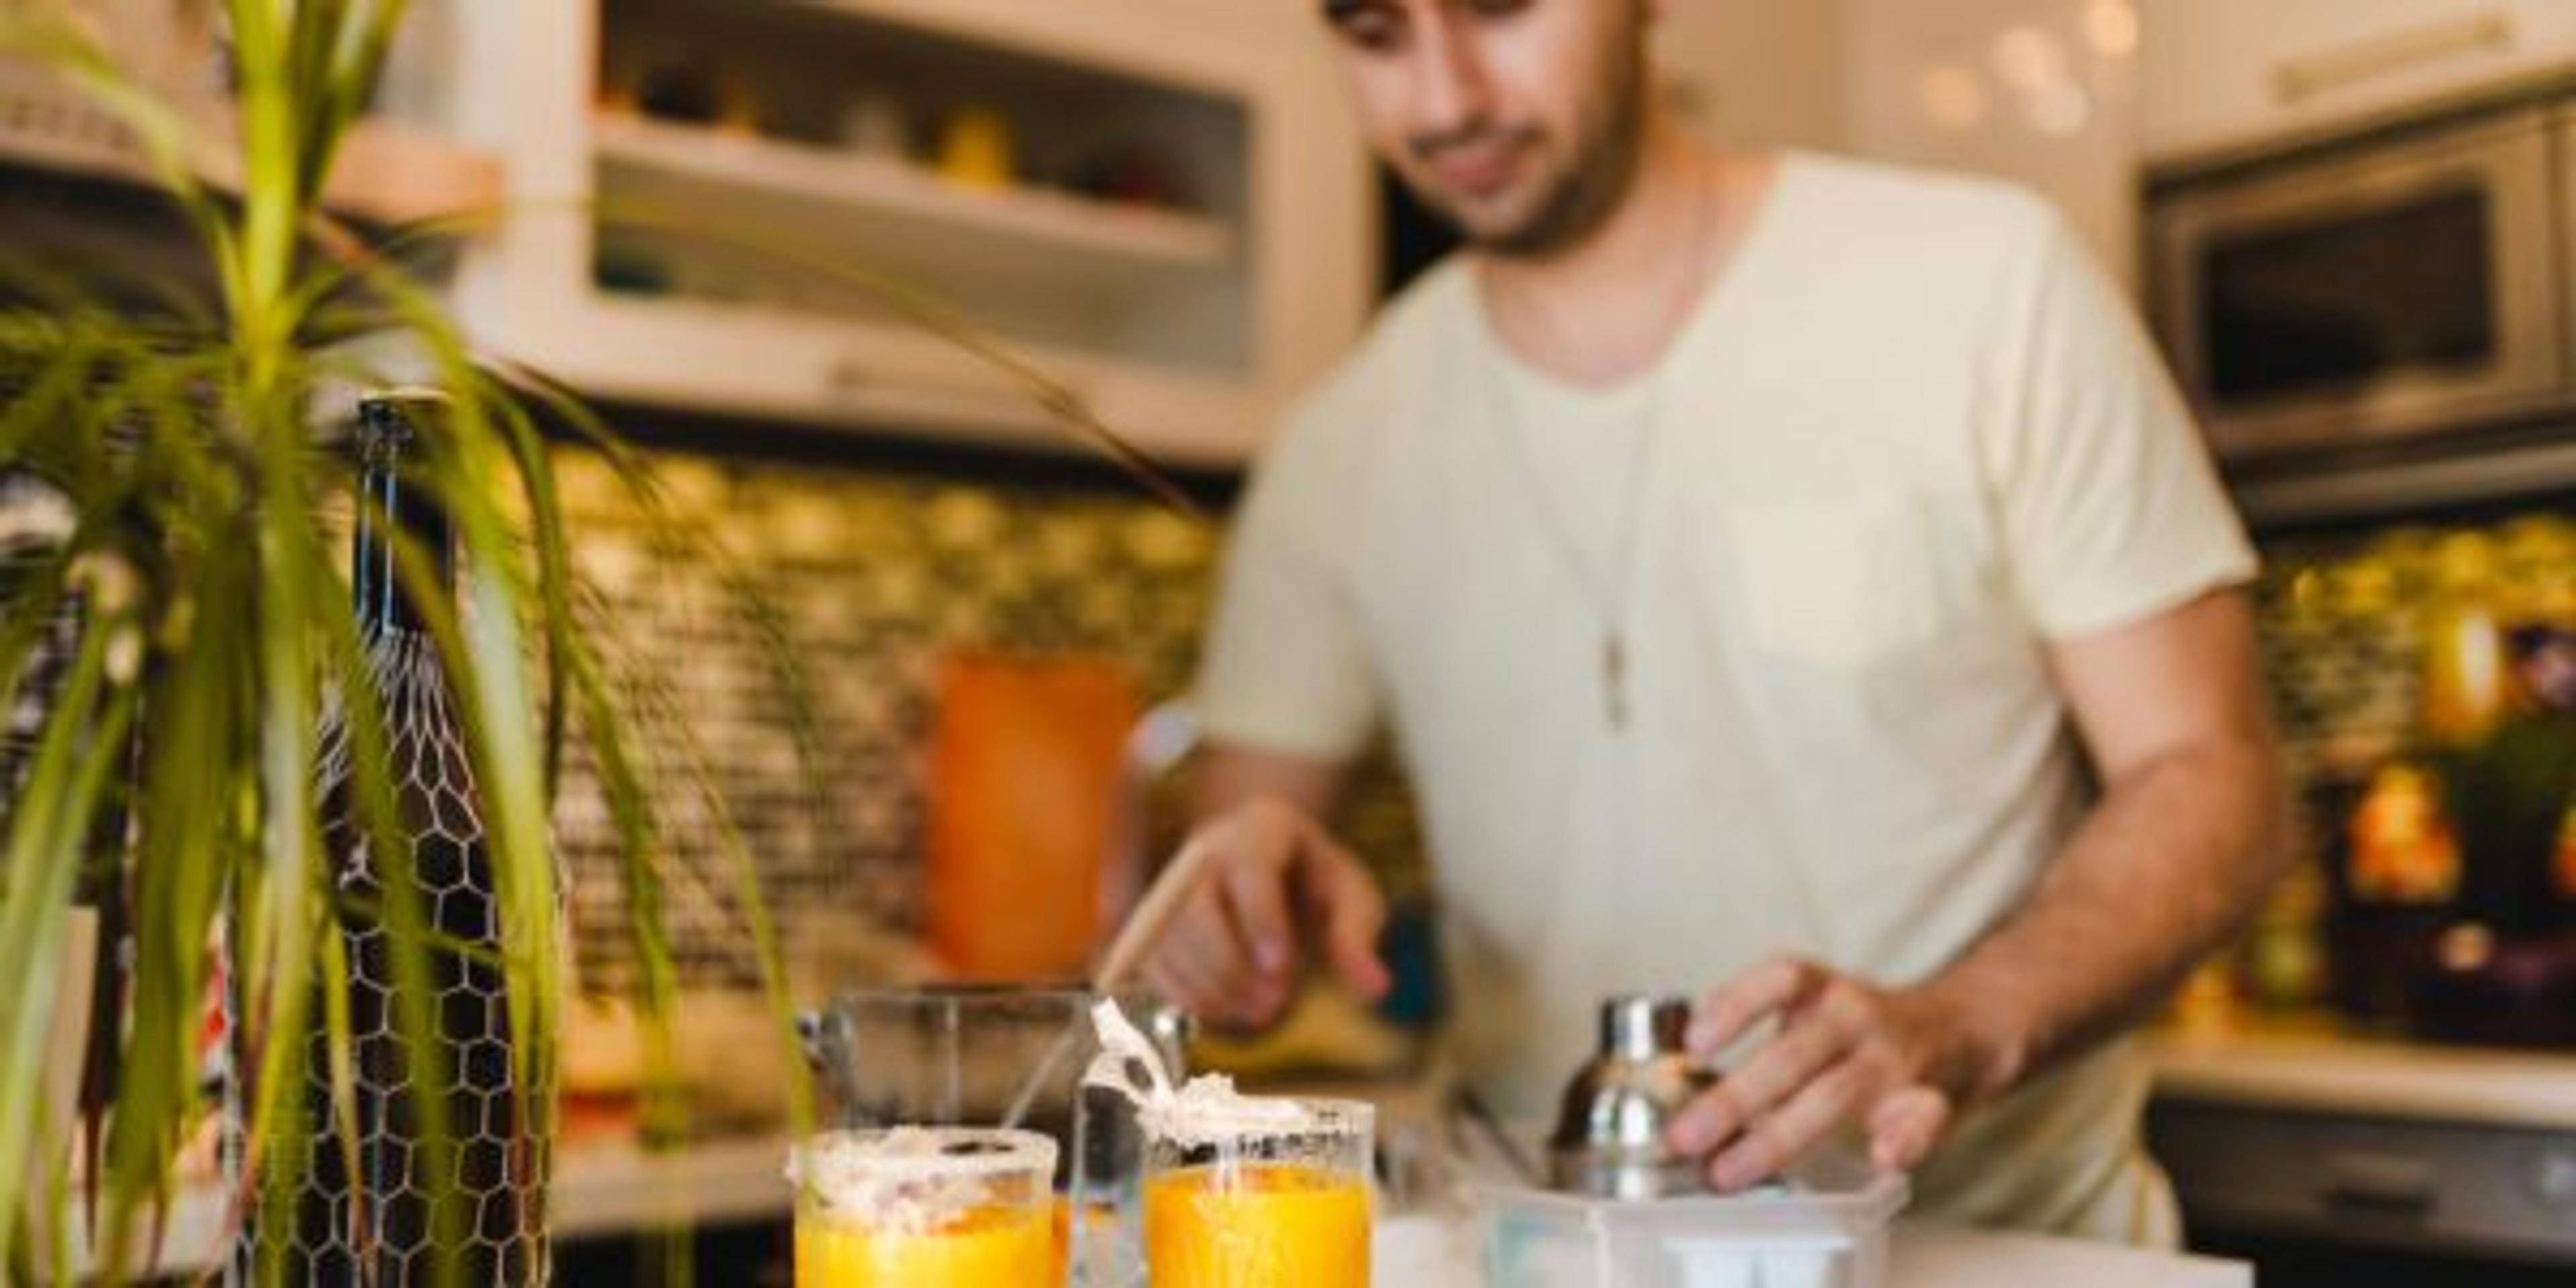 Young Adult Making Cocktails and having fun at Home